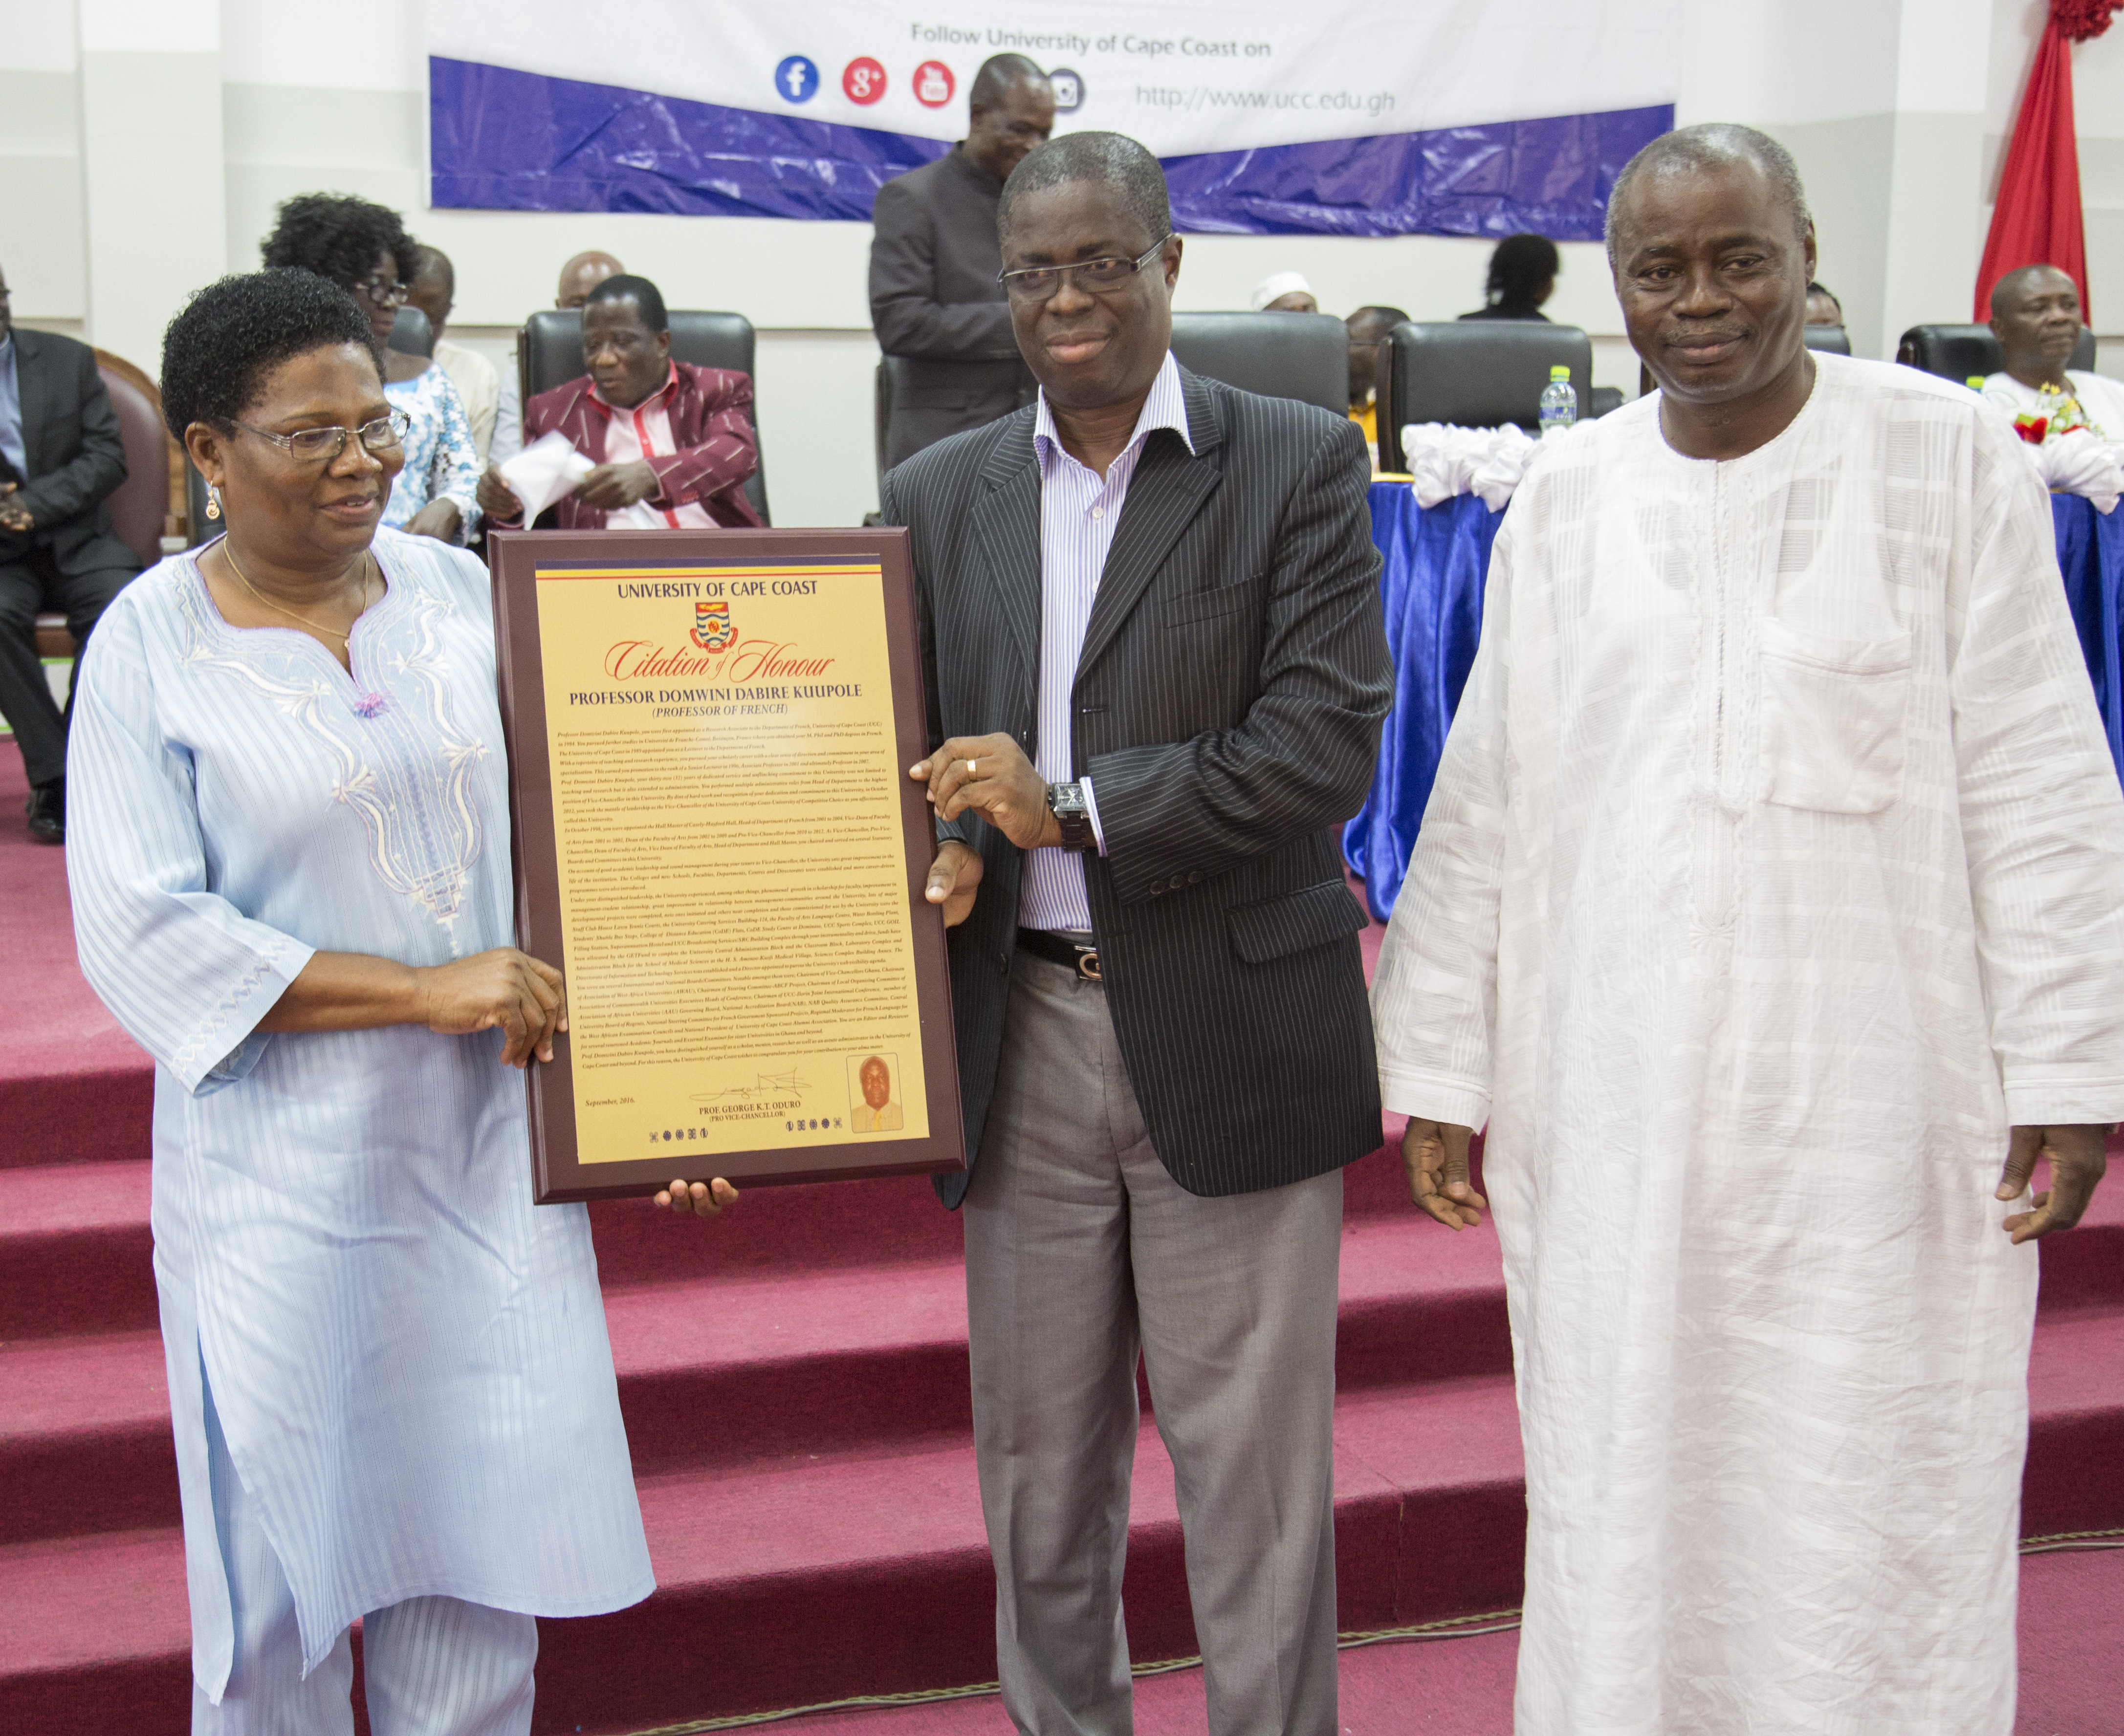 Dr Mrs Alfredina Kuupole (left) receiving a memento on behalf of Prof. Domwini Dabire Kuupole from Professor Joseph Ampiah Ghartey, incoming Vice Chancellor looking on Prof. S.B. Kendie, former Provost of the College of Humanities and Legal Studies (right).